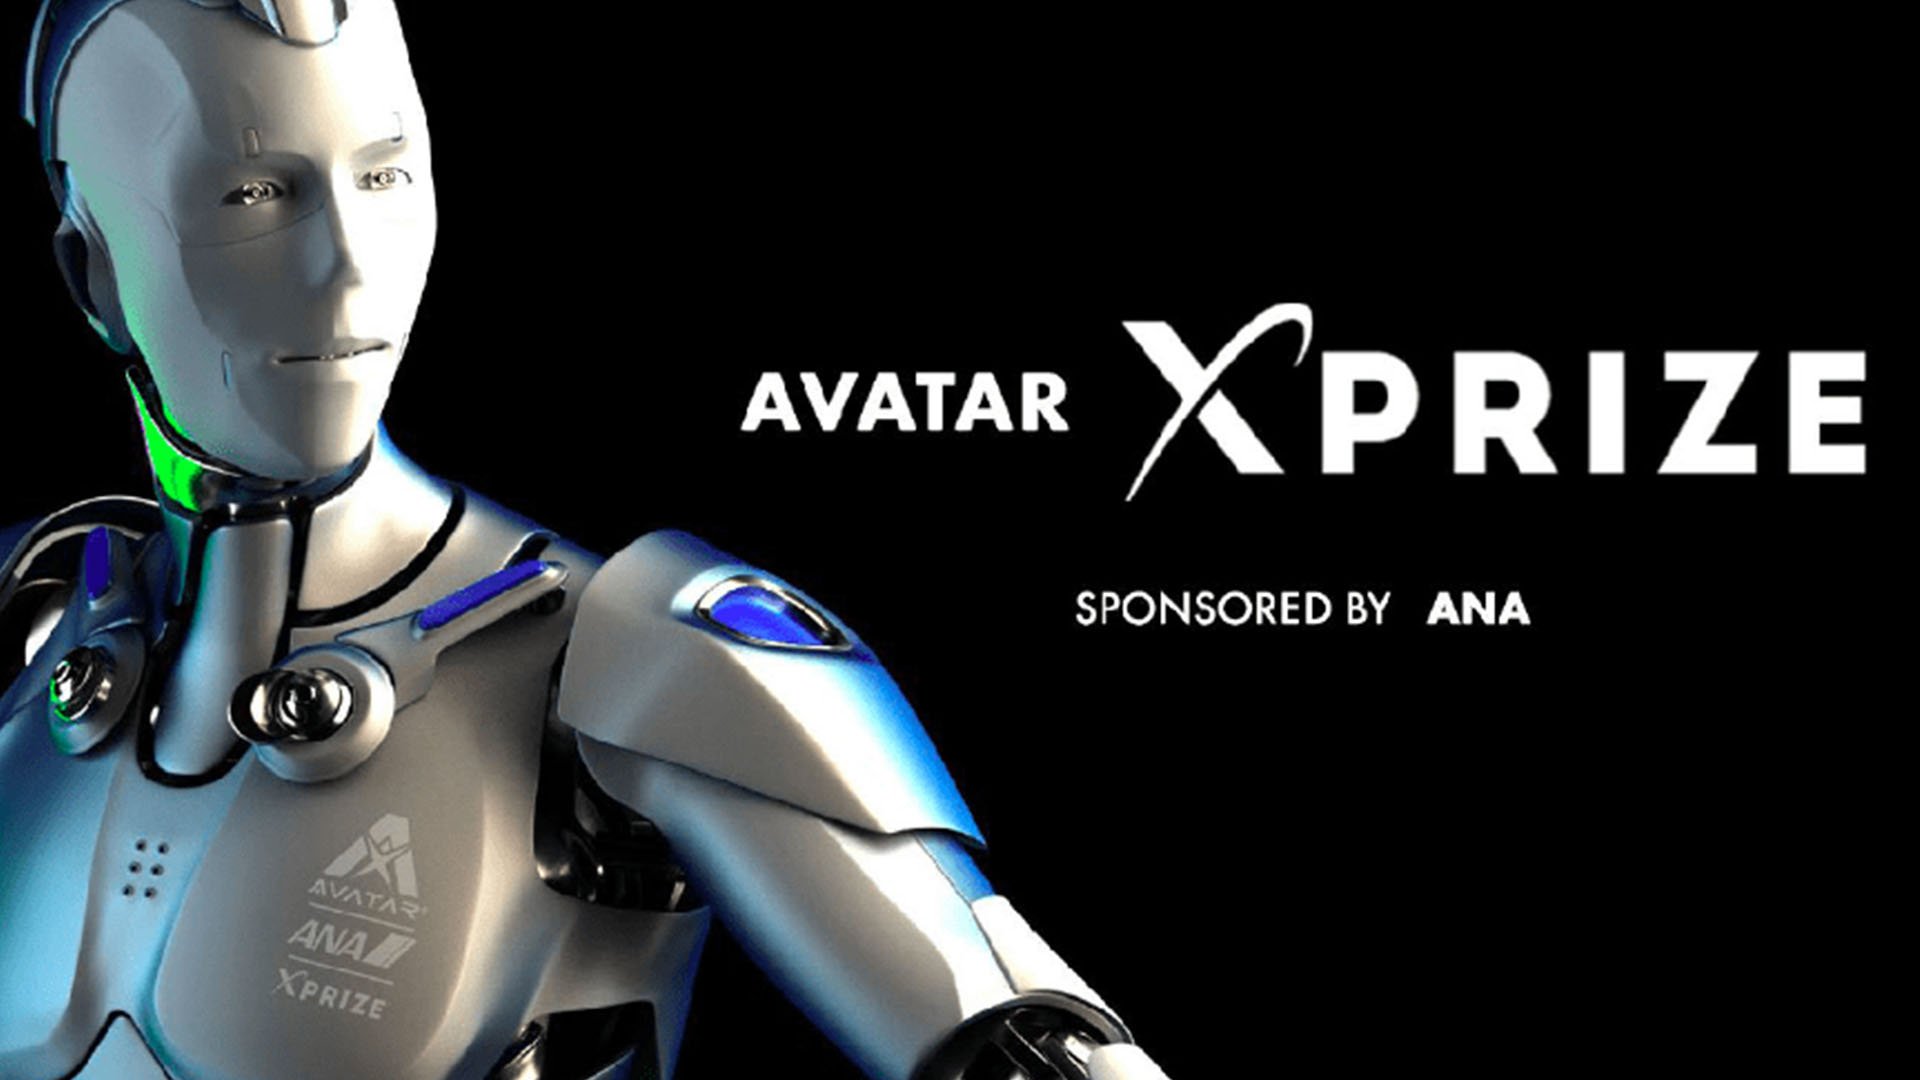 NimbRo Announced as Winner of the 10M ANA Avatar XPRIZE